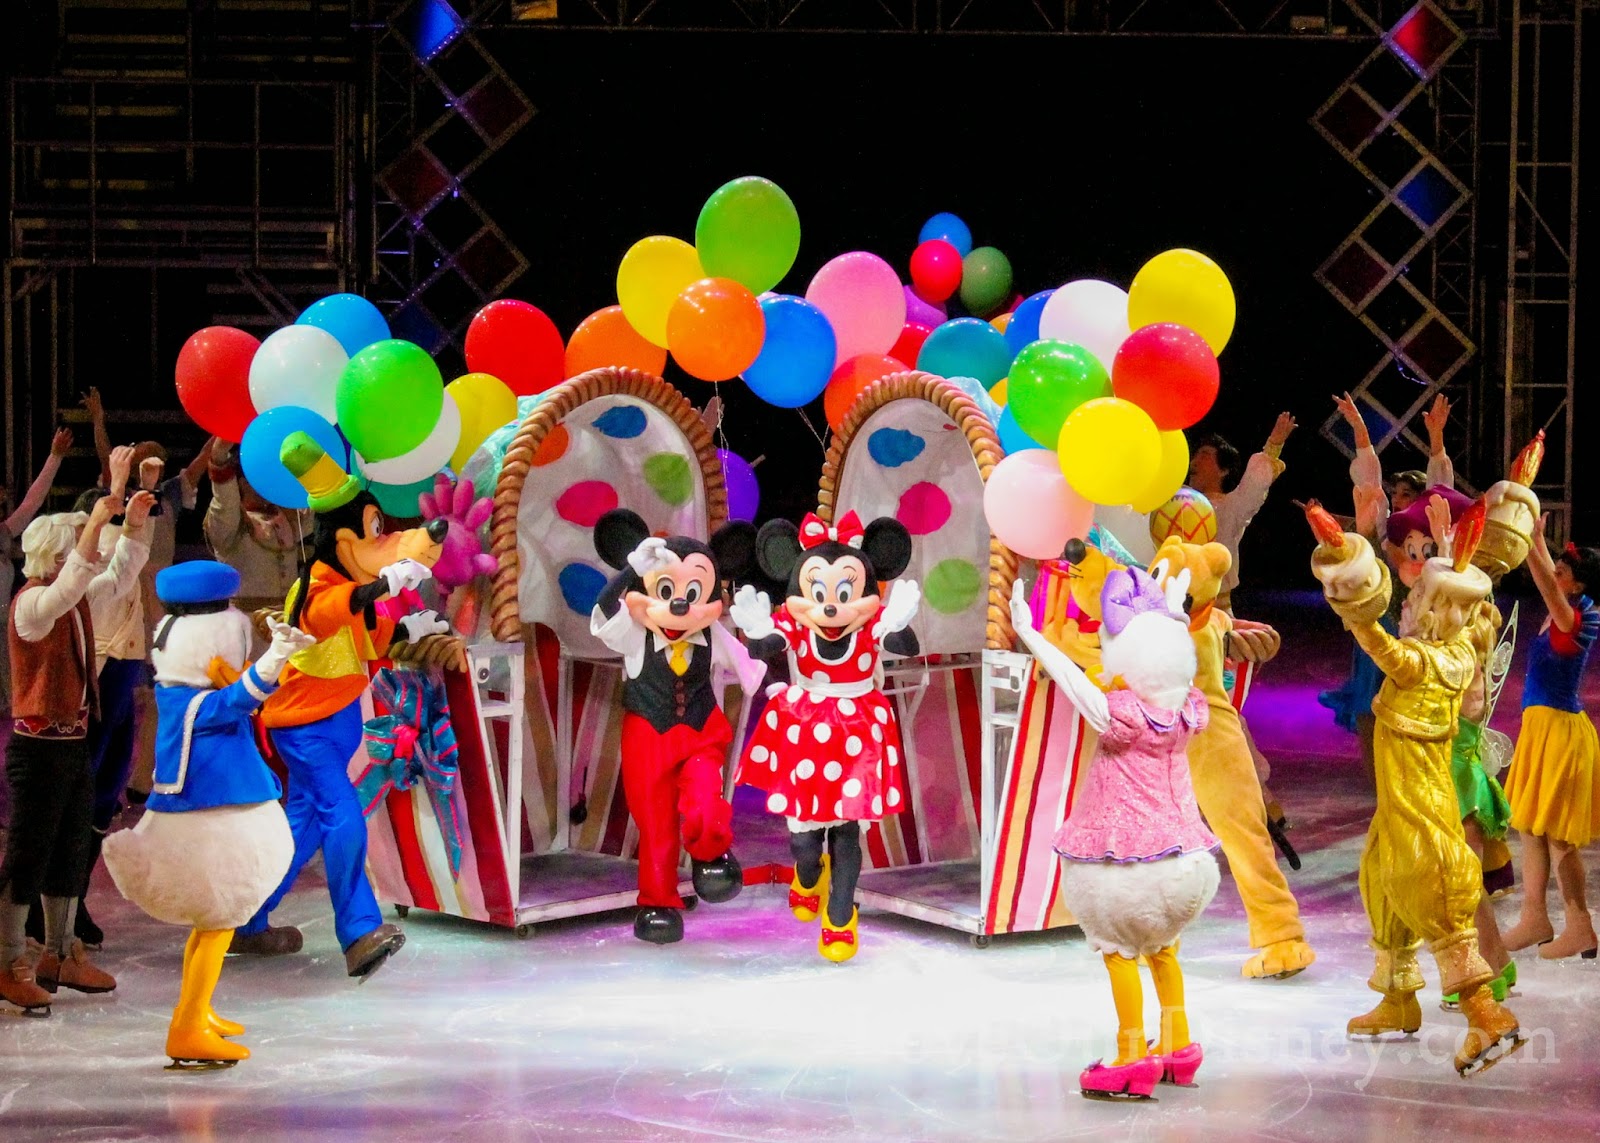  Ride RTA to Disney on Ice and Wade Oval to enjoy winter fun